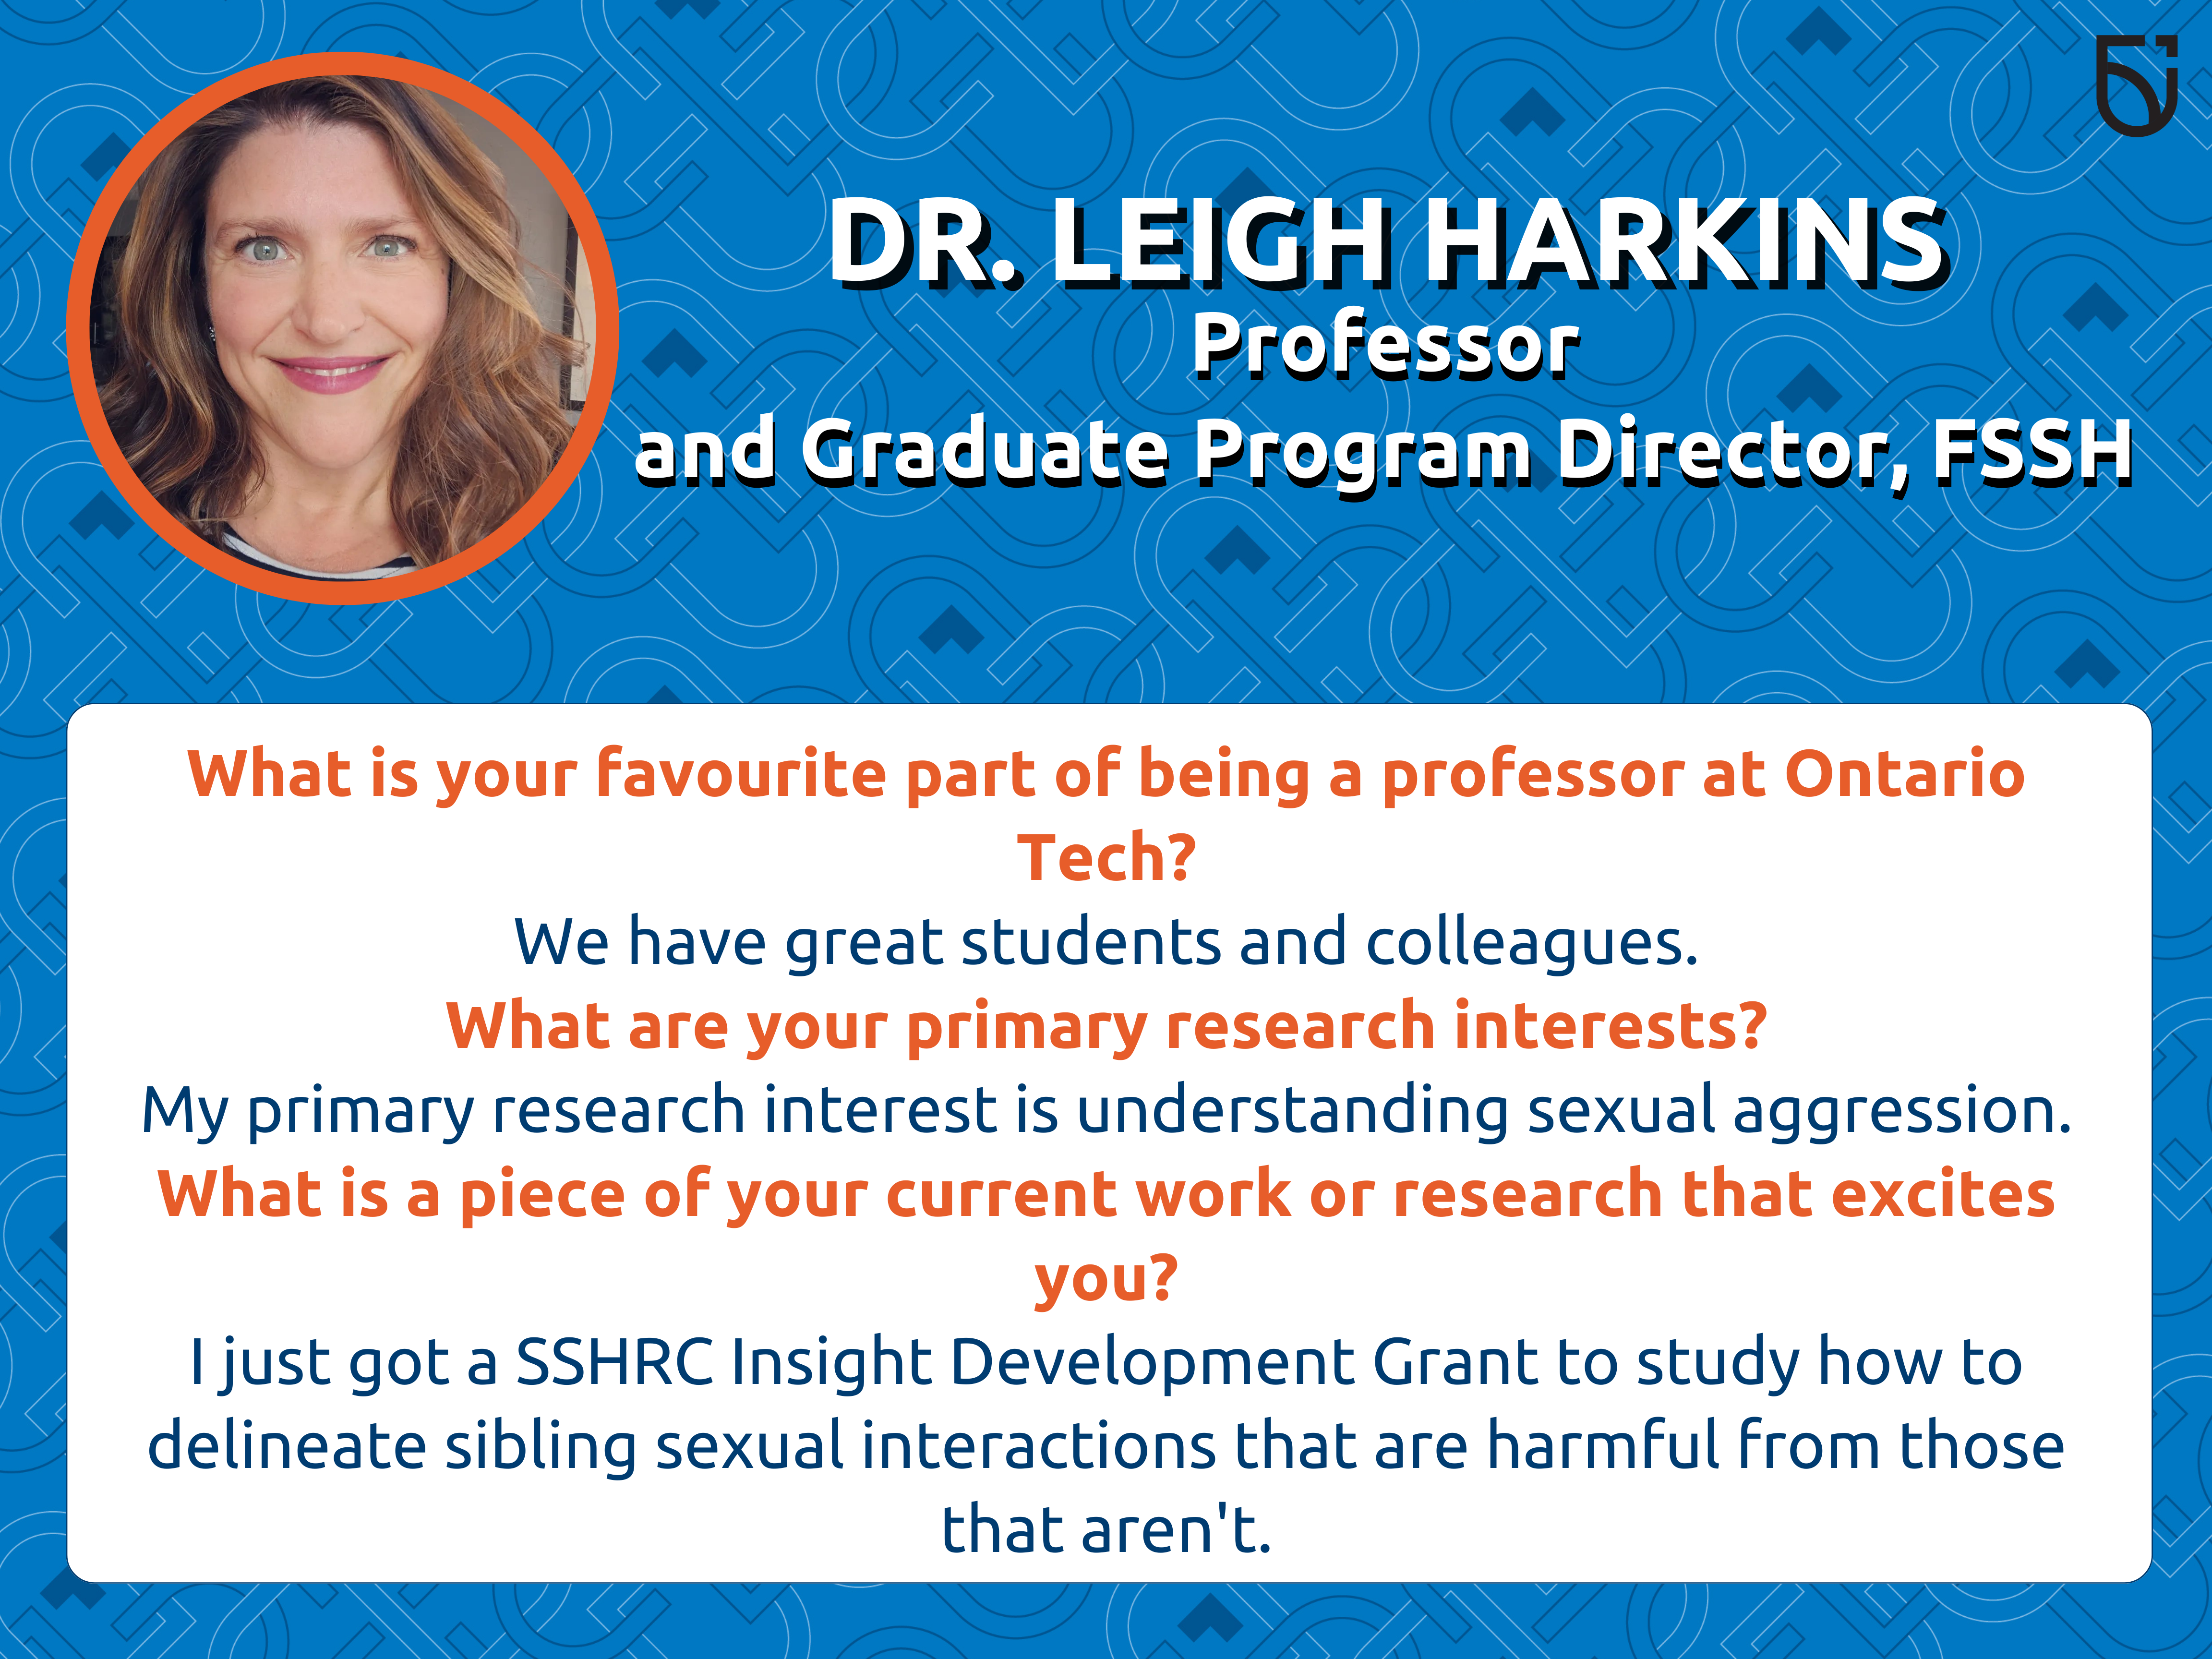 This photo is a Women’s Wednesday feature of Dr. Leigh Harkins, a Professor in the Faculty of Social Science and Humanities